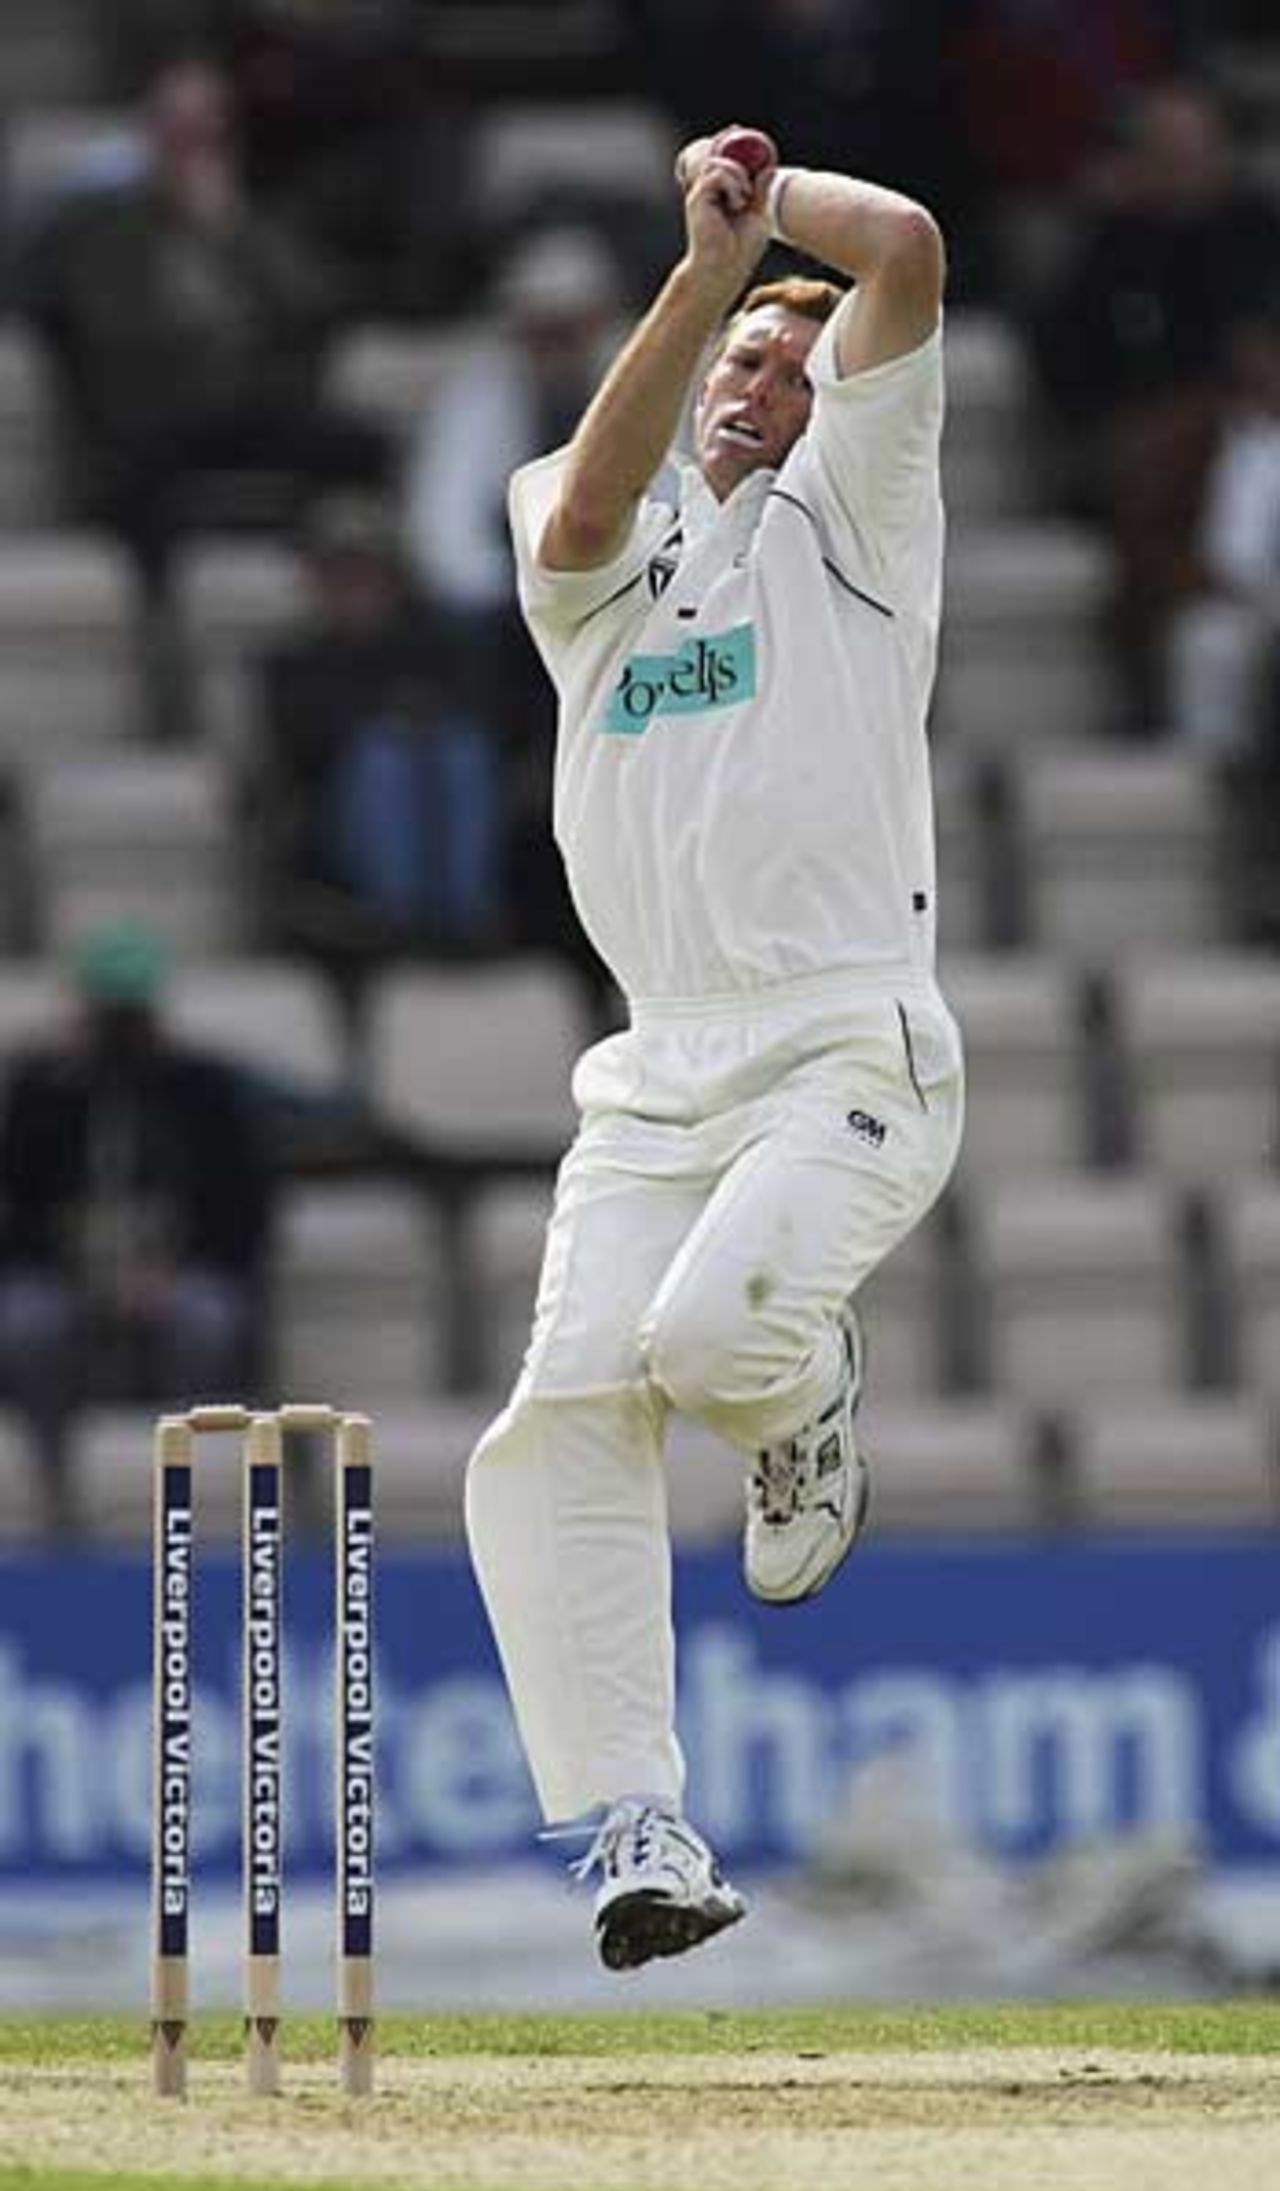 Concentrating hard: Dominic Thornely leaps up high, Hampshire v Sussex, Southampton, April 26, 2006